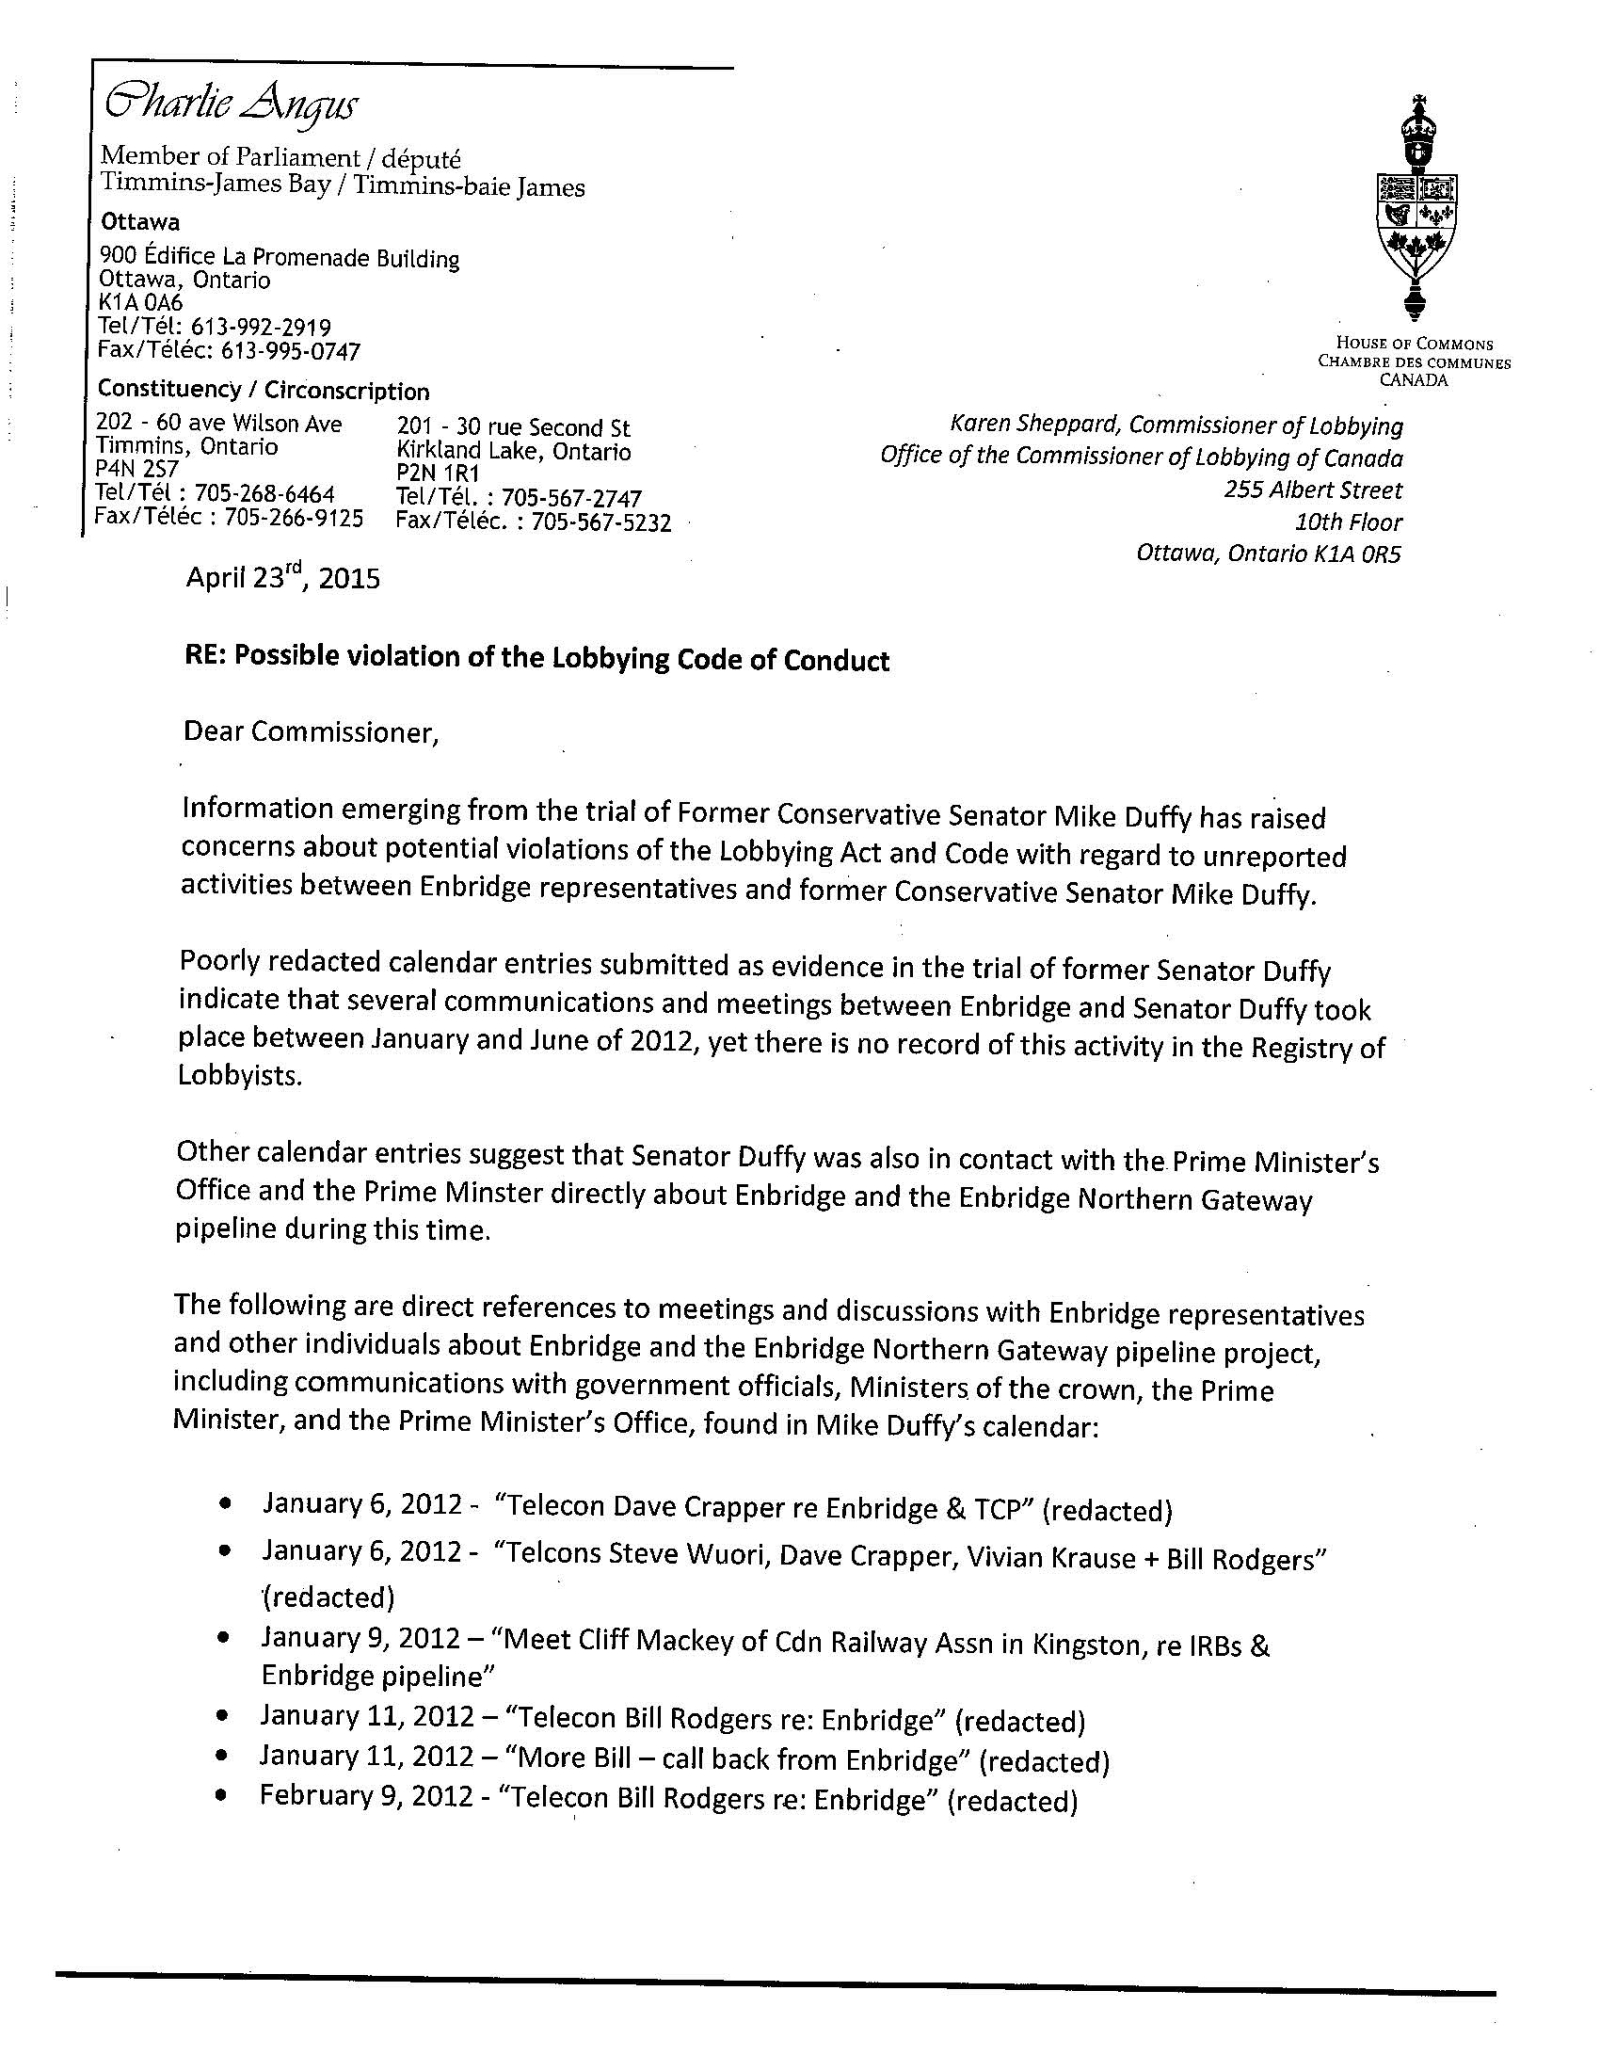 NDP Charlie Angus Possible Violation of Lobbying Code of Conduct by Enbridge letter